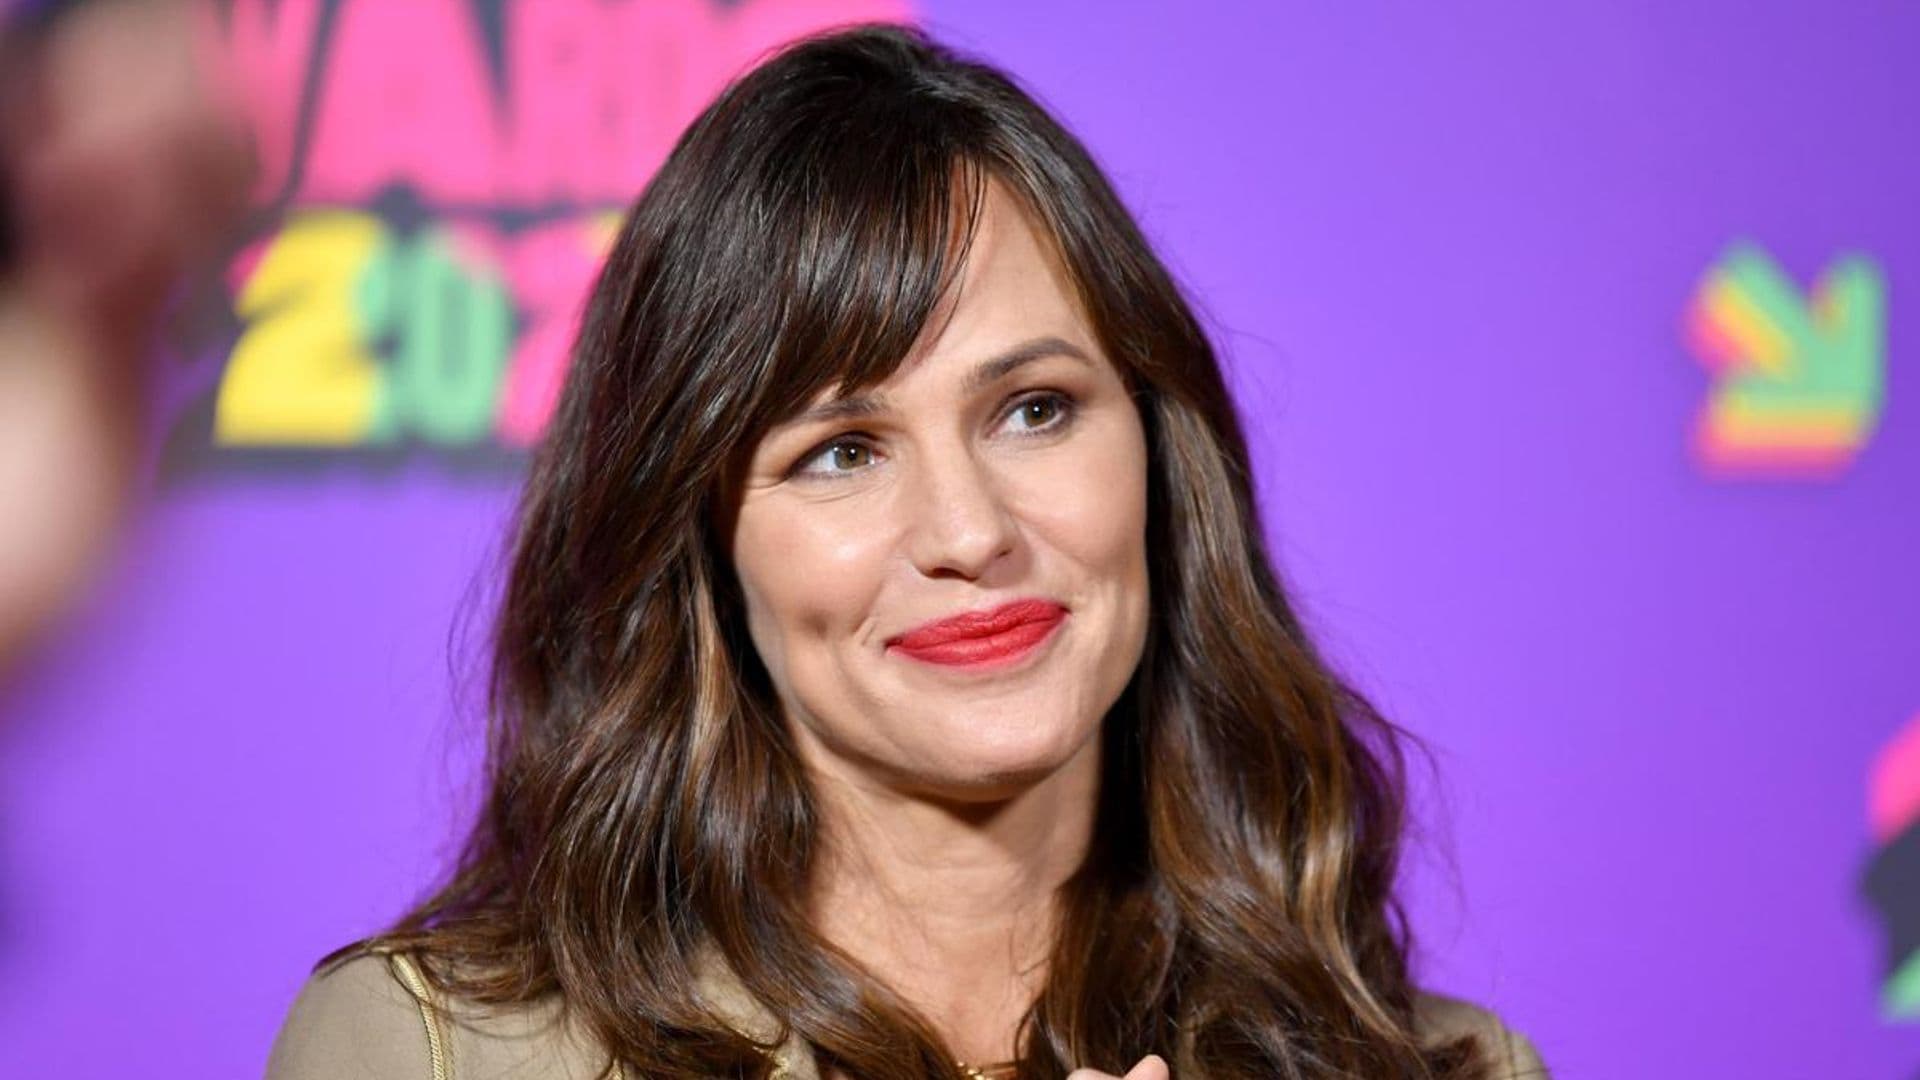 Jennifer Garner pretends she has a cooking show and makes beef and Cheese empanadas [RECIPE]